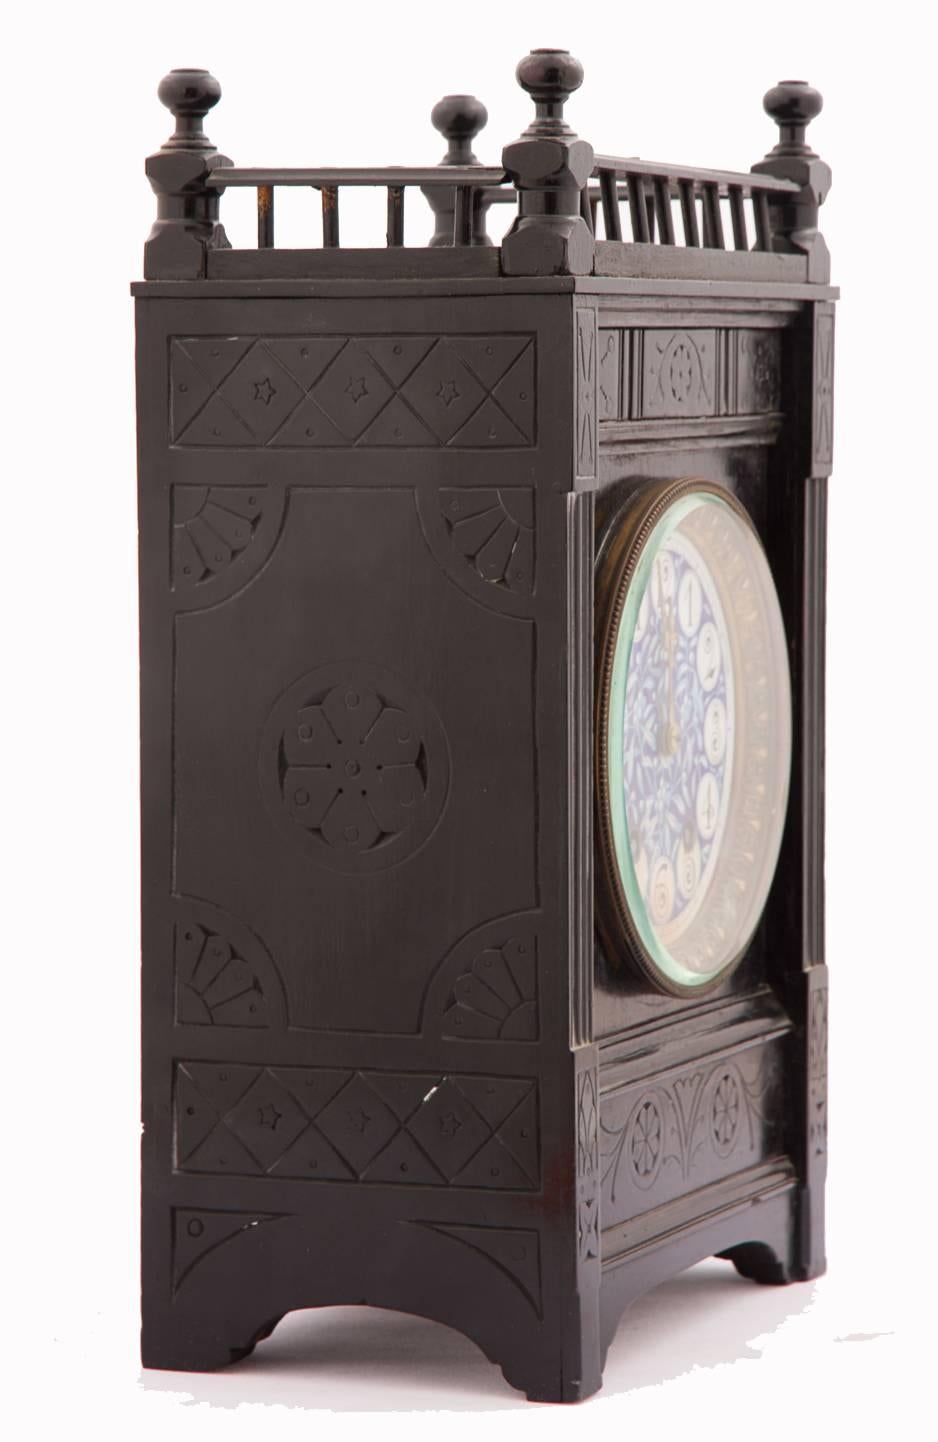 English Aesthetic Movement ebonized wood and pottery mantle clock .

After Lewis F. Day, Attributed to Howell & James, London, of rectangular form, with carved wood gallery above the lightly-carved and incised frame, the rectangular pottery clock